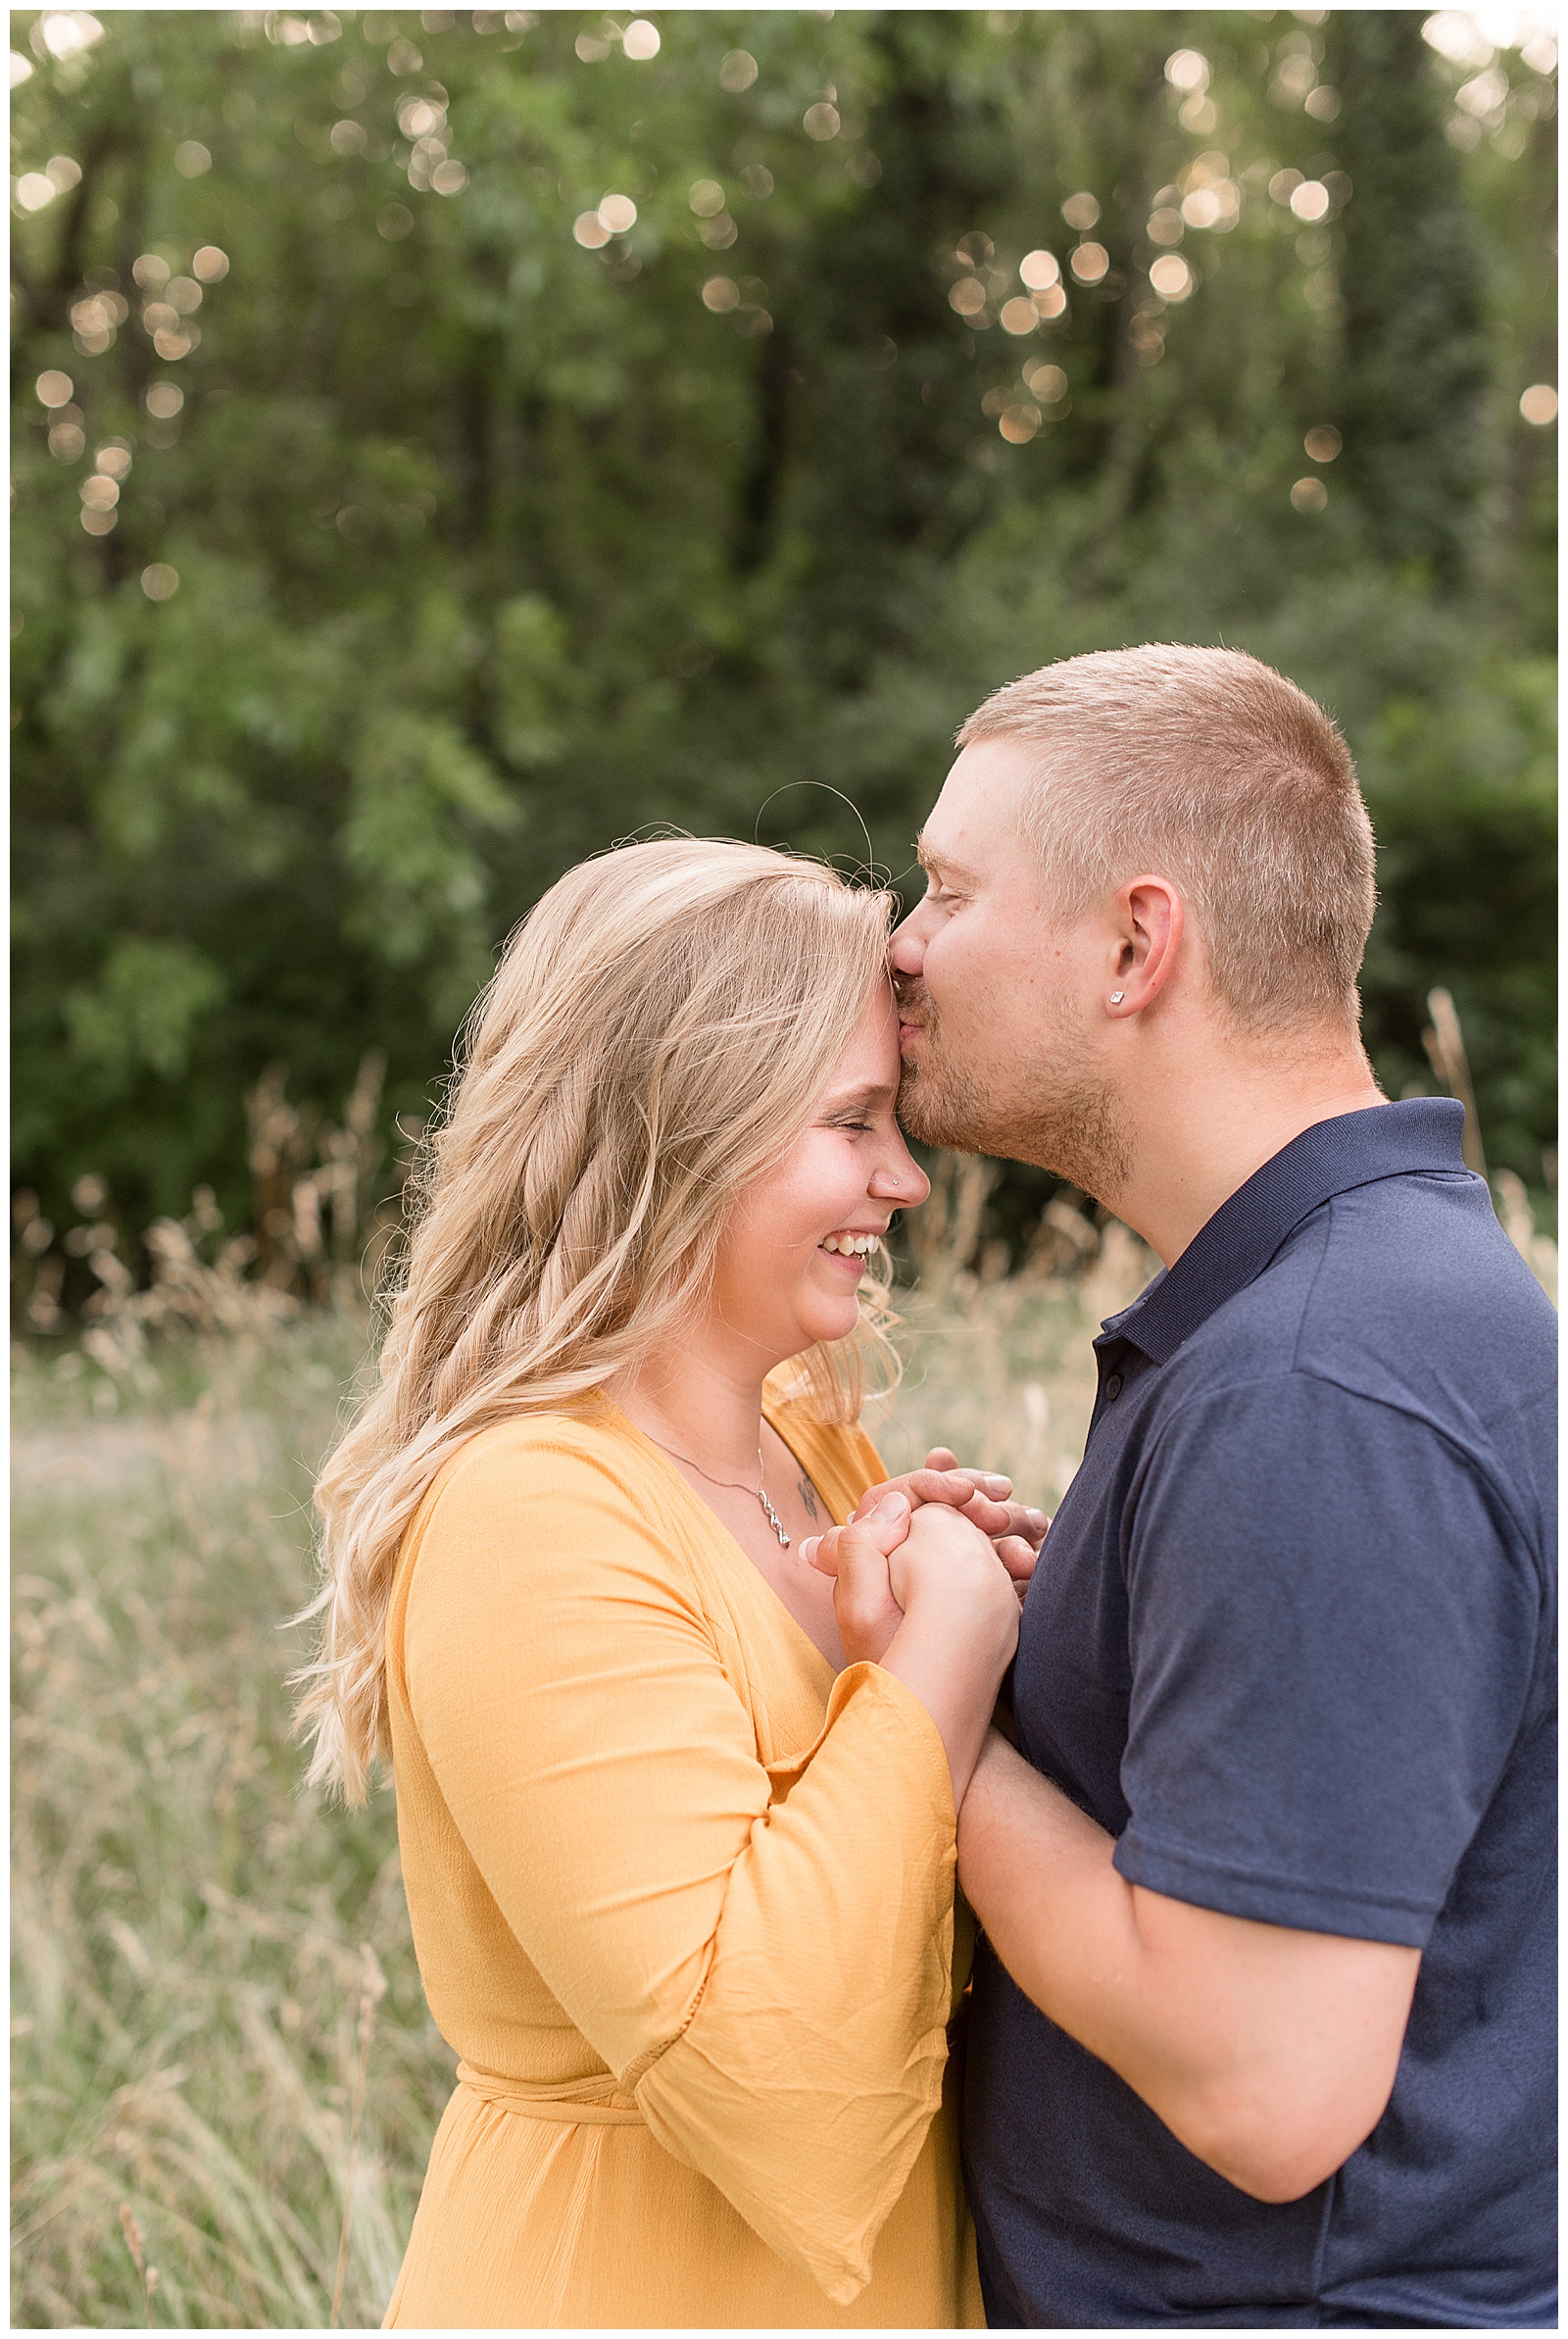 groom-to-be kissing bride-to-be's forehead as she smiles and they hug tightly in tall grasses in lancaster pennsylvania